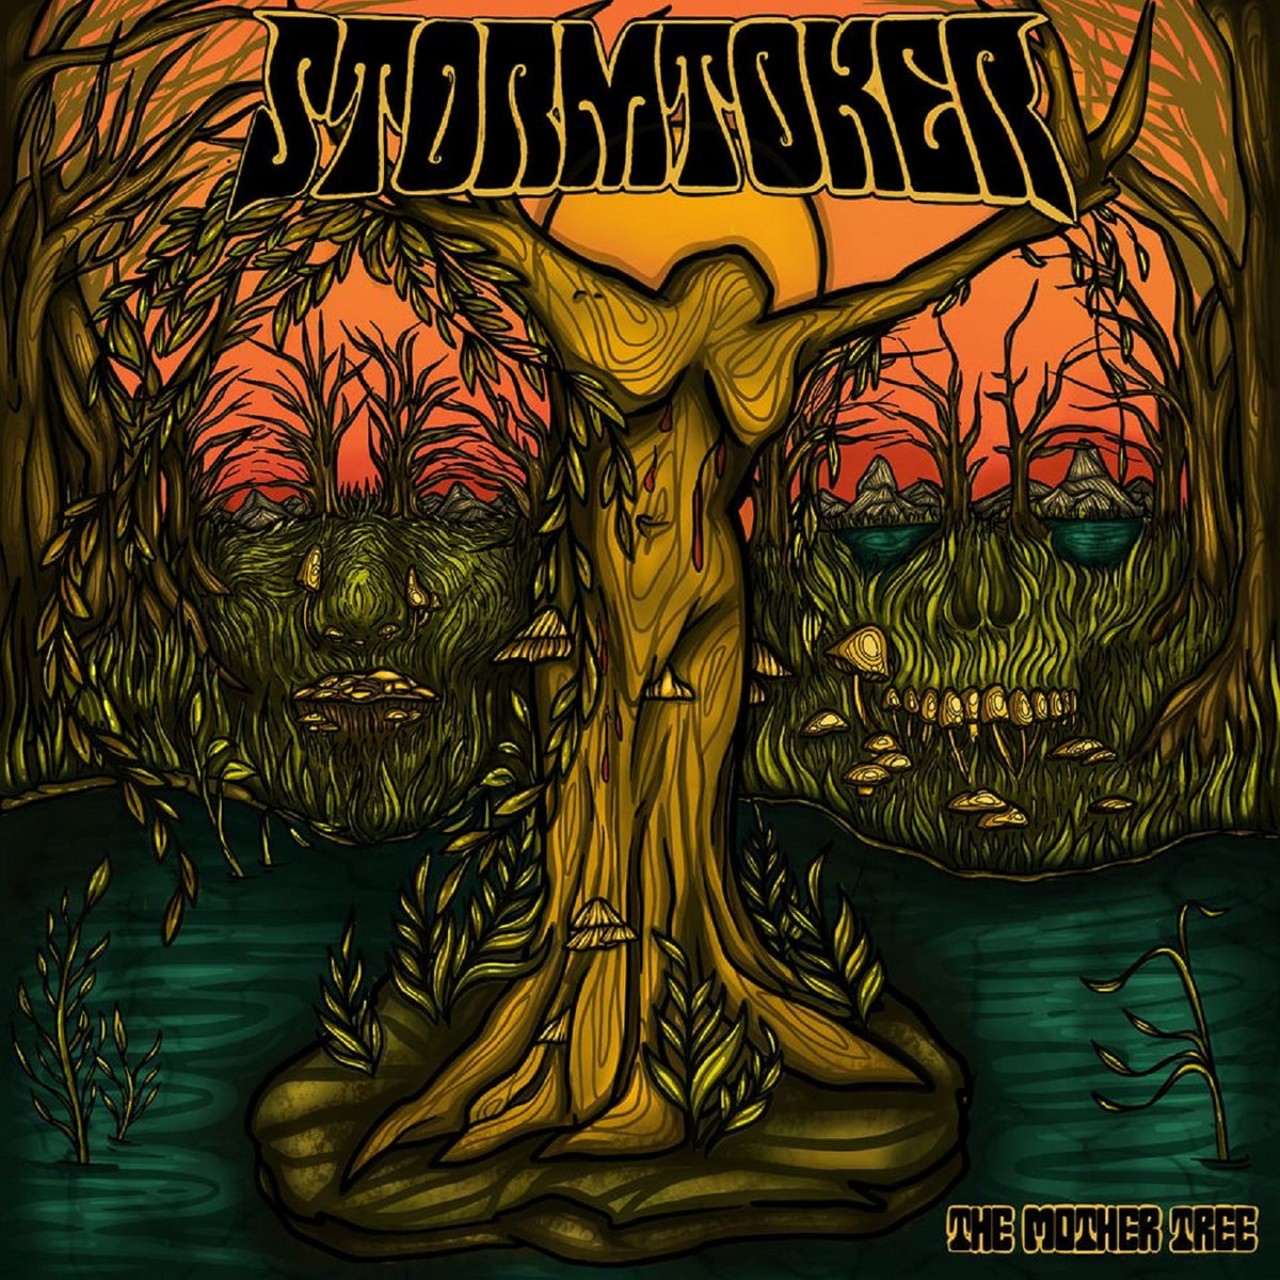  StormToker &#151; &#147;Poor Man&#146;s Doom&#148; 
Yeah, I know it&#146;s a bit of a stretch to list a band from Lexington in a piece about local songs. However, it is my opinion that StormToker plays Louisville often enough to be considered local. Honestly, though, I just really love this song and want to turn people on to this band. For the most part, StormToker plays a sludgy mix of stoner metal, doom, thrash, heavy blues, psych and prog rock in downtuned and very heavy, groove-driven songs. They are not really the kind of band you can pigeonhole, but at the same time not a band you&#146;d expect to hear a jangly, upbeat rockabilly tune from. Yet smack-dab in the middle of their latest album, The Mother Tree, there it is! Guitarist/vocalist Anthony Grigsby said: &#147;I got really heavy into Colter Wall. &#145;The Devil Wears a Suit and Tie&#146; blew me away. It was just simple and powerful. I wanted to kind of emulate it.&#148; However, StormToker being StormToker, the tune is rolling right along when all of a sudden the chorus kicks in and you get clubbed over the head with massively heavy doom-ish stoner metal, then right back into the rockabilly verse, leaving the listener wondering what just happened? Lyrically, with the refrain of &#147;Where you&#146;re born is where you&#146;ll die, my friend,&#148; this is a rather blunt and depressing tune about being a wage slave for life. Overall, &#147;Poor Man&#146;s Doom&#148; is certainly a crowning moment for this Lexington trio. &#151;Jeff Polk
Listen on Bandcamp 